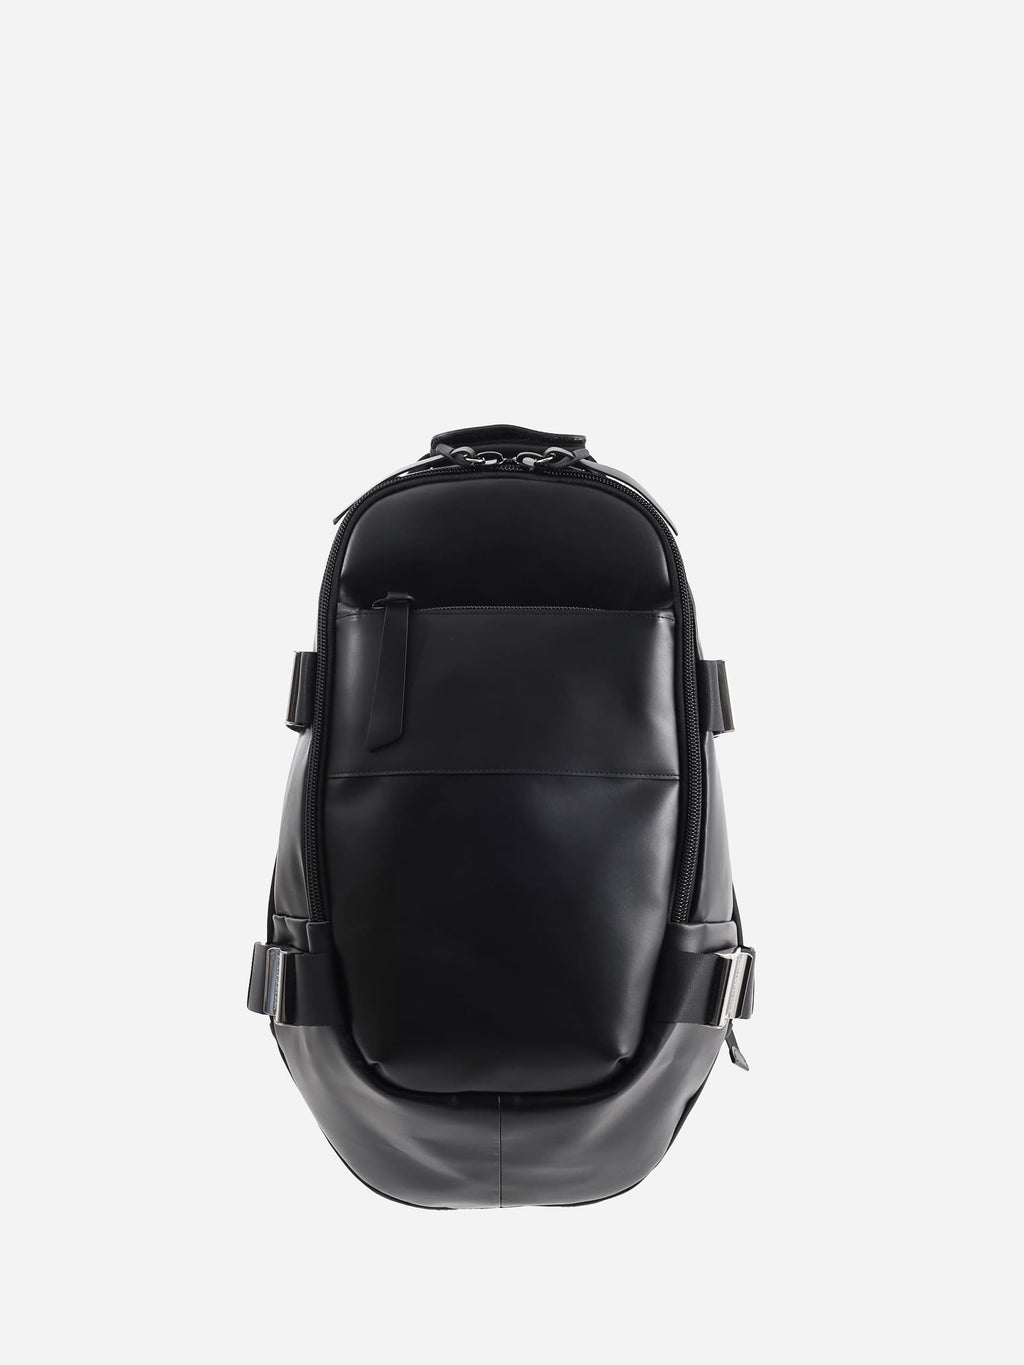 PACK-2 leatherbackpack (for 16inch pc) 洋服好きにお薦めな 